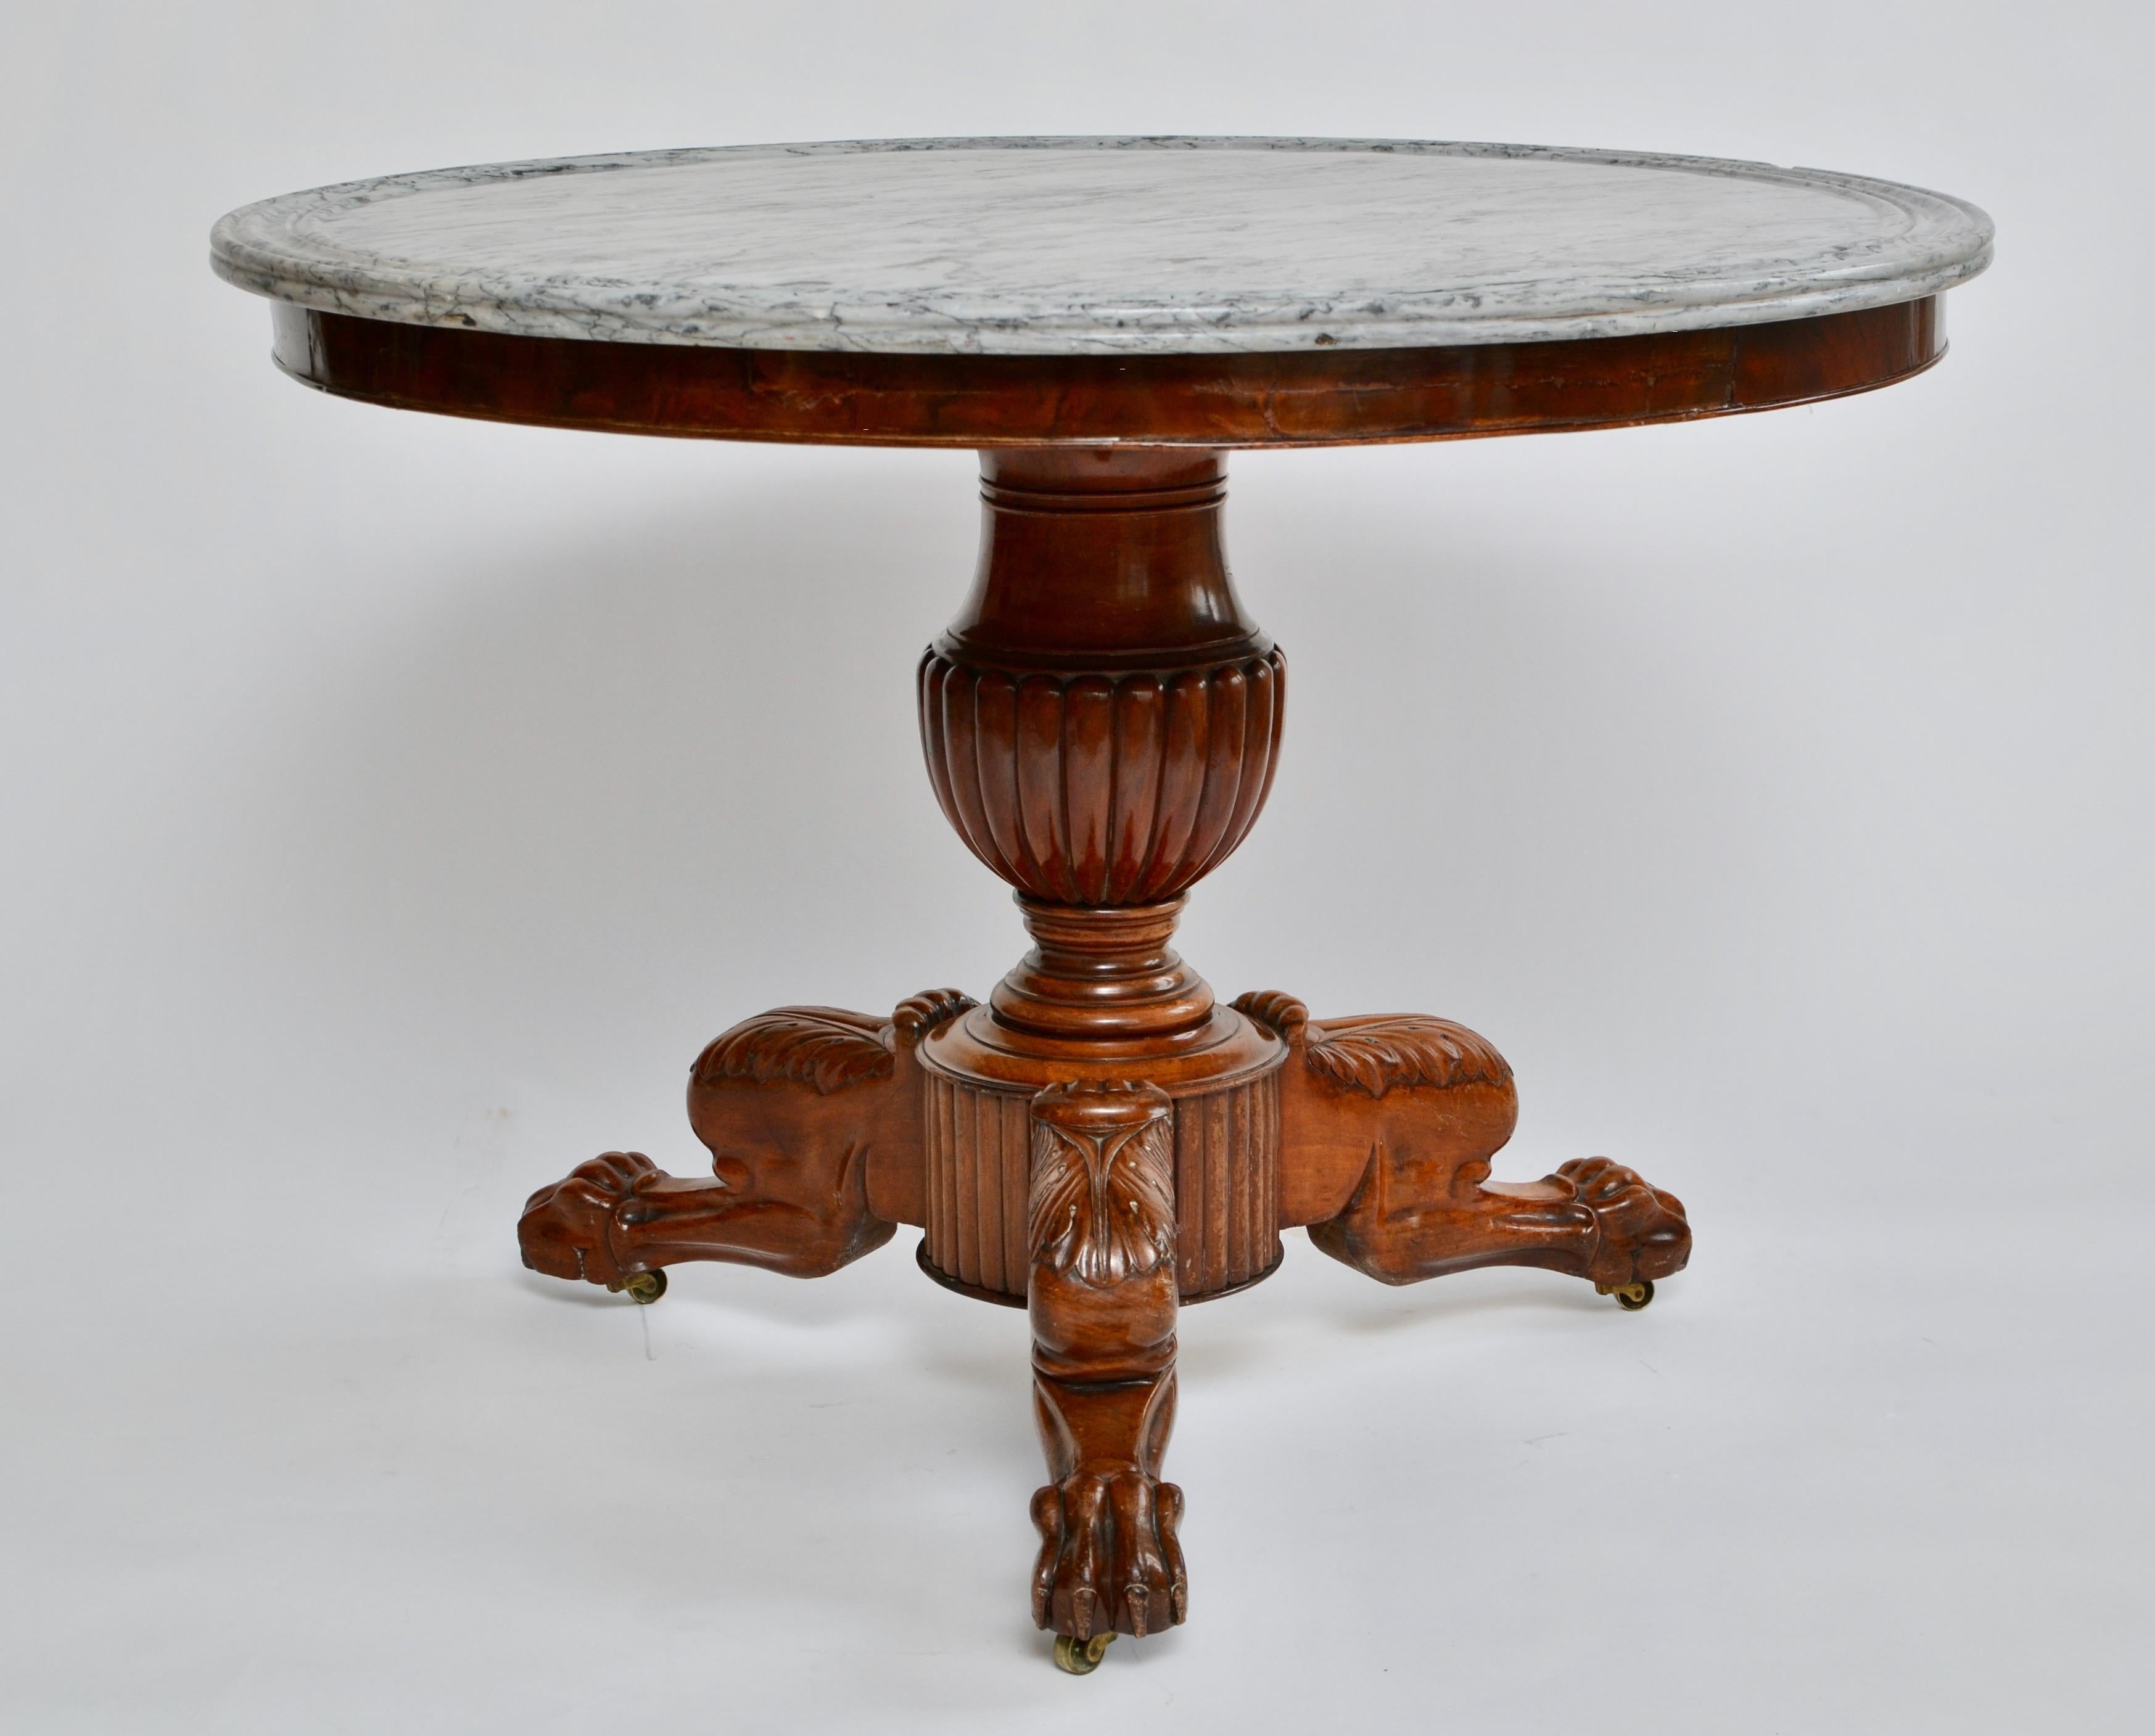 An early 19th century French empire mahogany gueridon table with a circular moulded grey marble top raised on an urn-form pedestal ending with acanthus carved tripod legs terminating in lions paw feet with castors. Very nice carving.